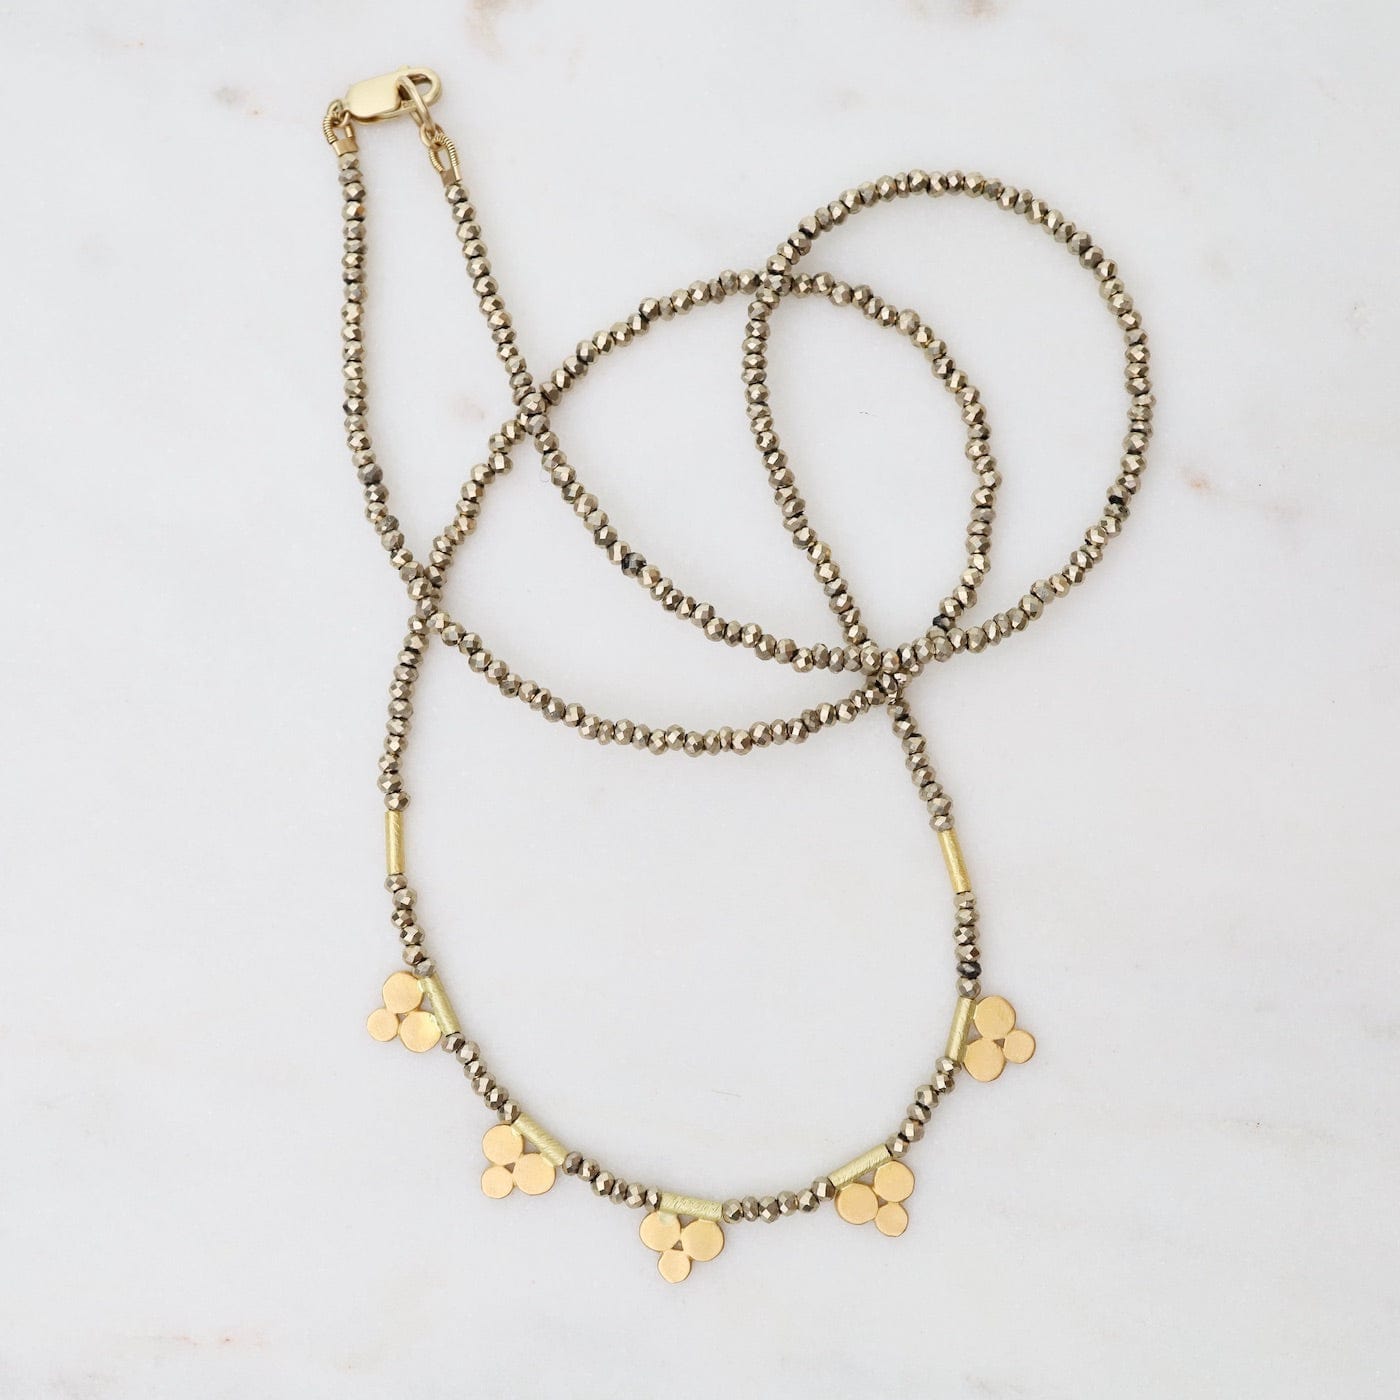 NKL-22K Pyrite Bead Necklace with Five 22k Trios